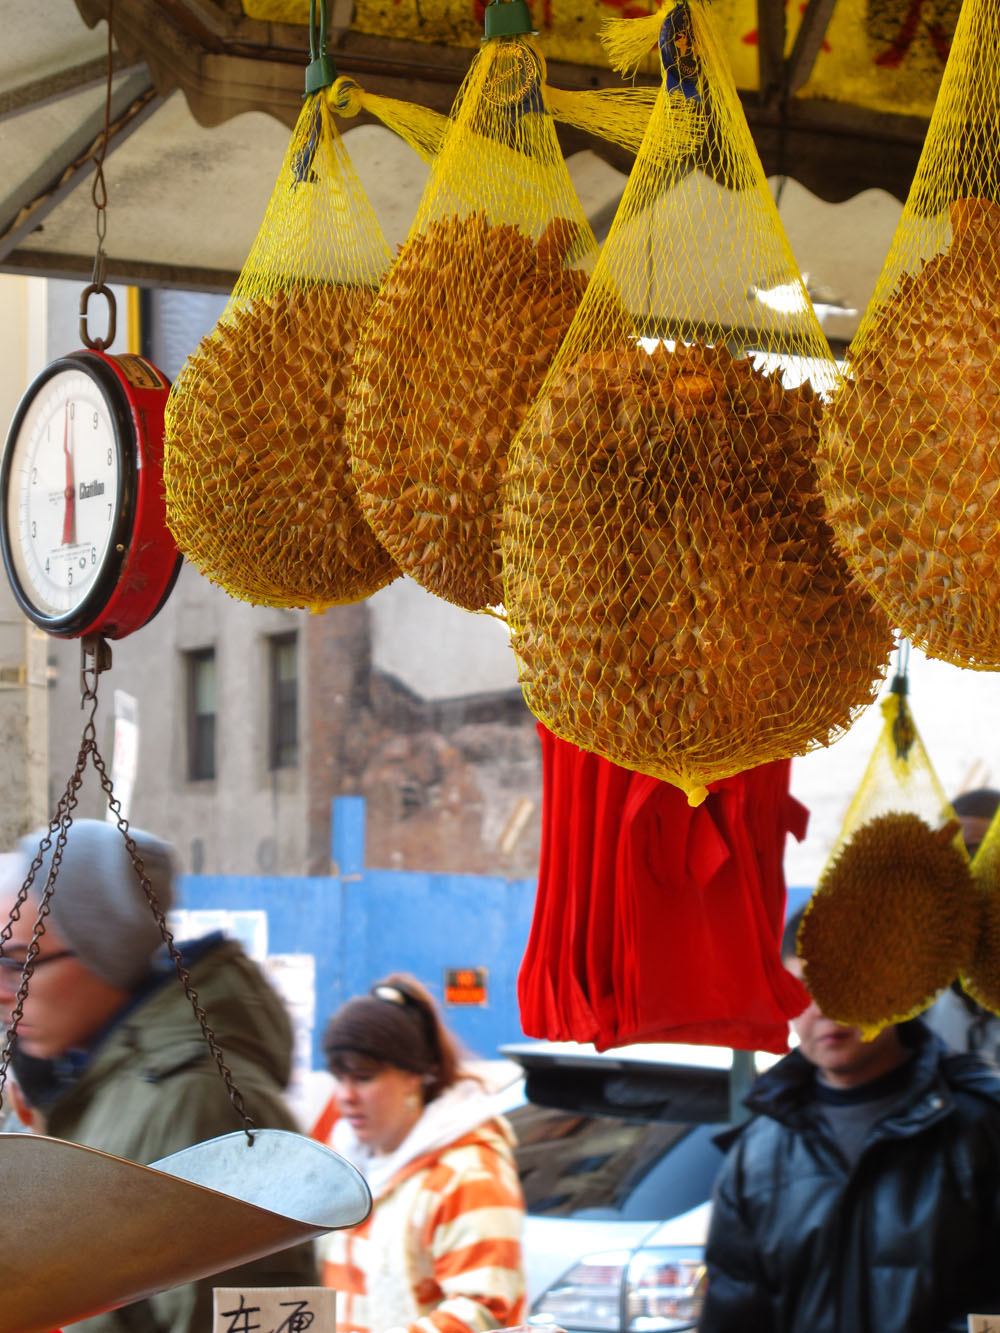 durian for sale in NYC Chinatown